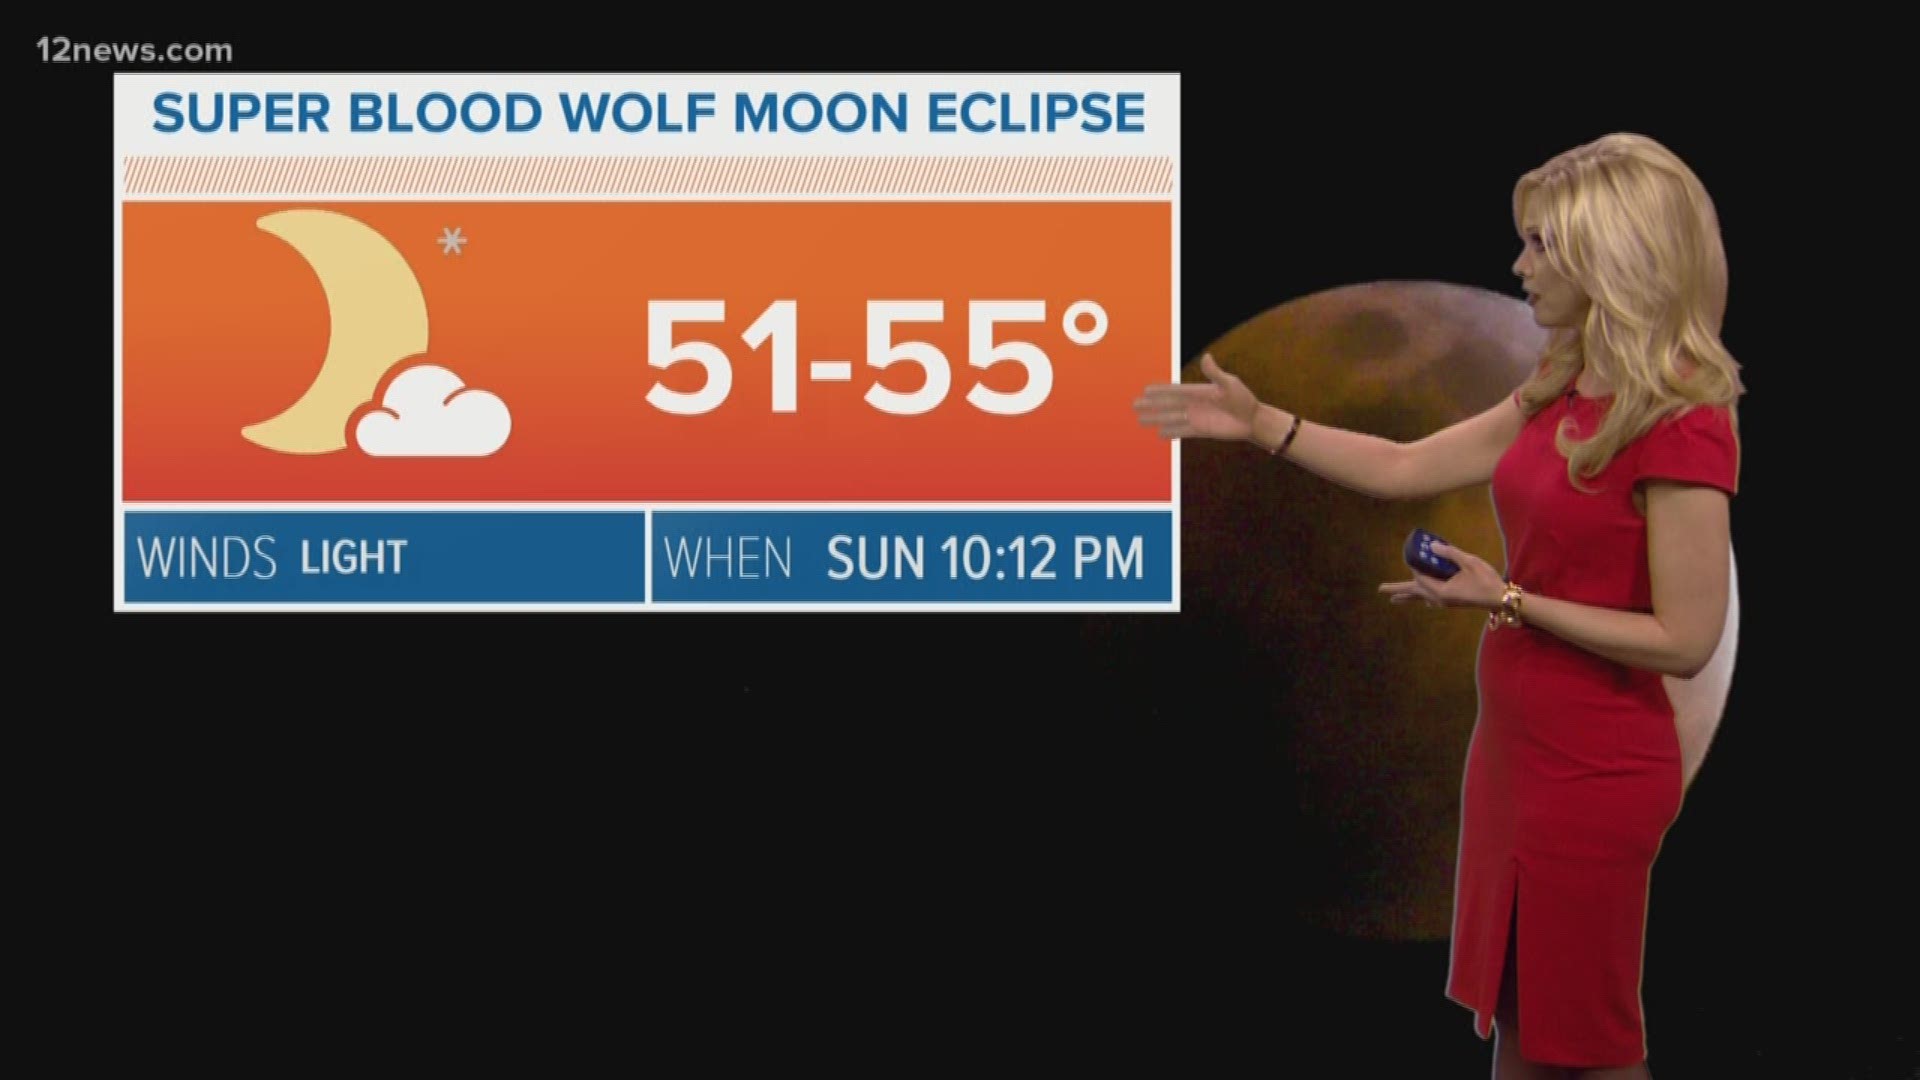 The Super Wolf Blood Moon is a lunar eclipse, supermoon and full moon all in one. And it's happening Sunday, Jan. 20.